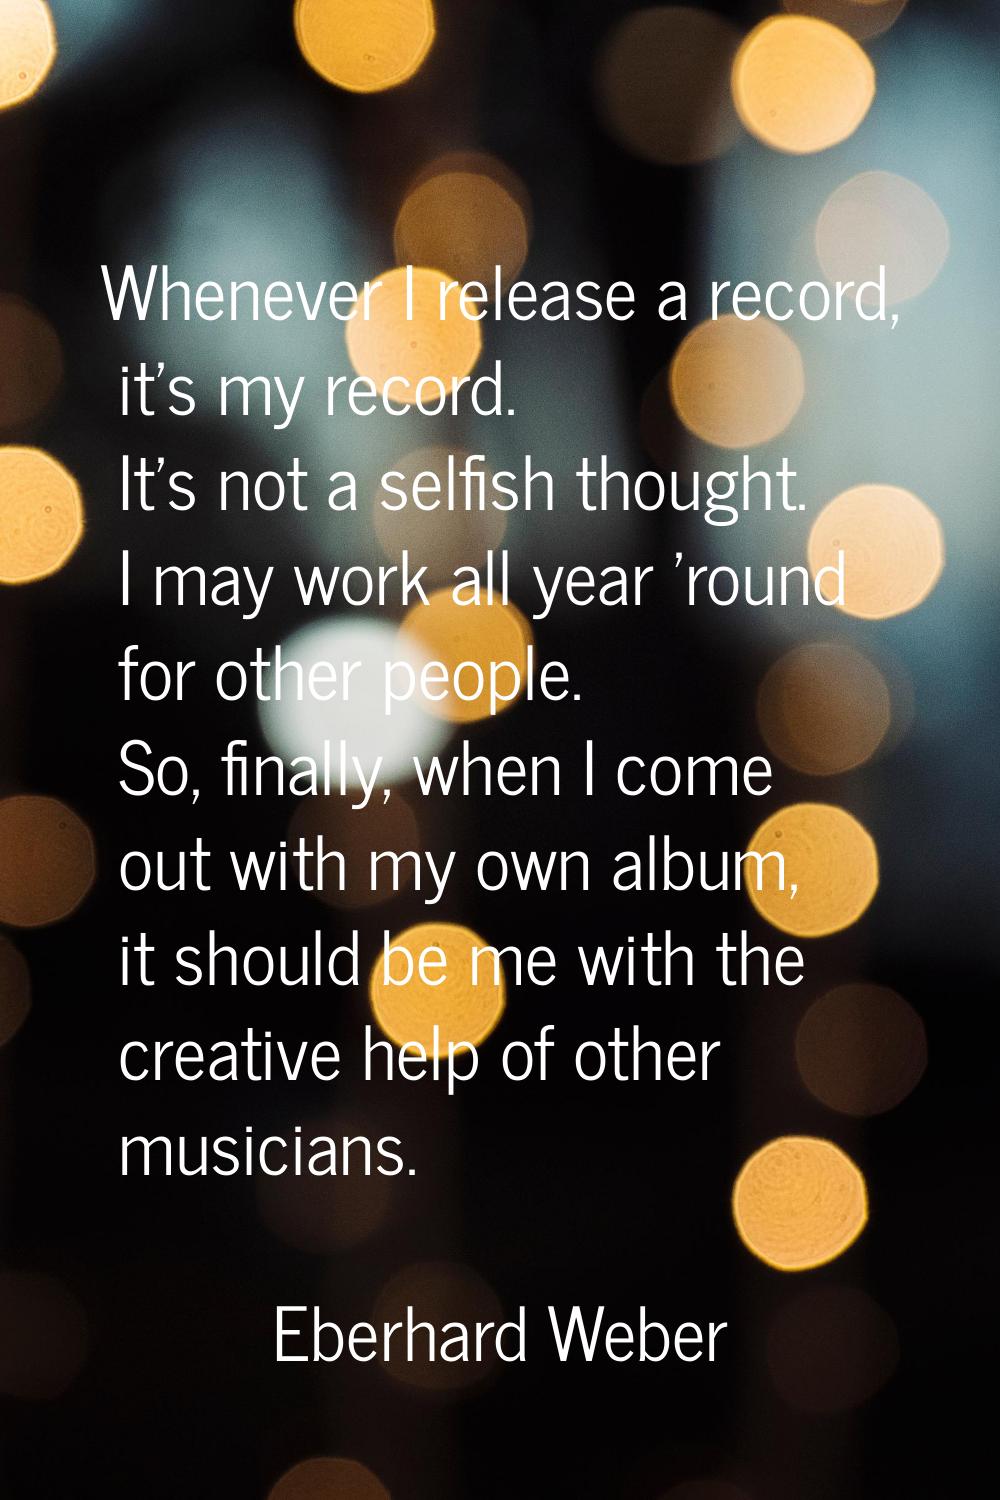 Whenever I release a record, it's my record. It's not a selfish thought. I may work all year 'round